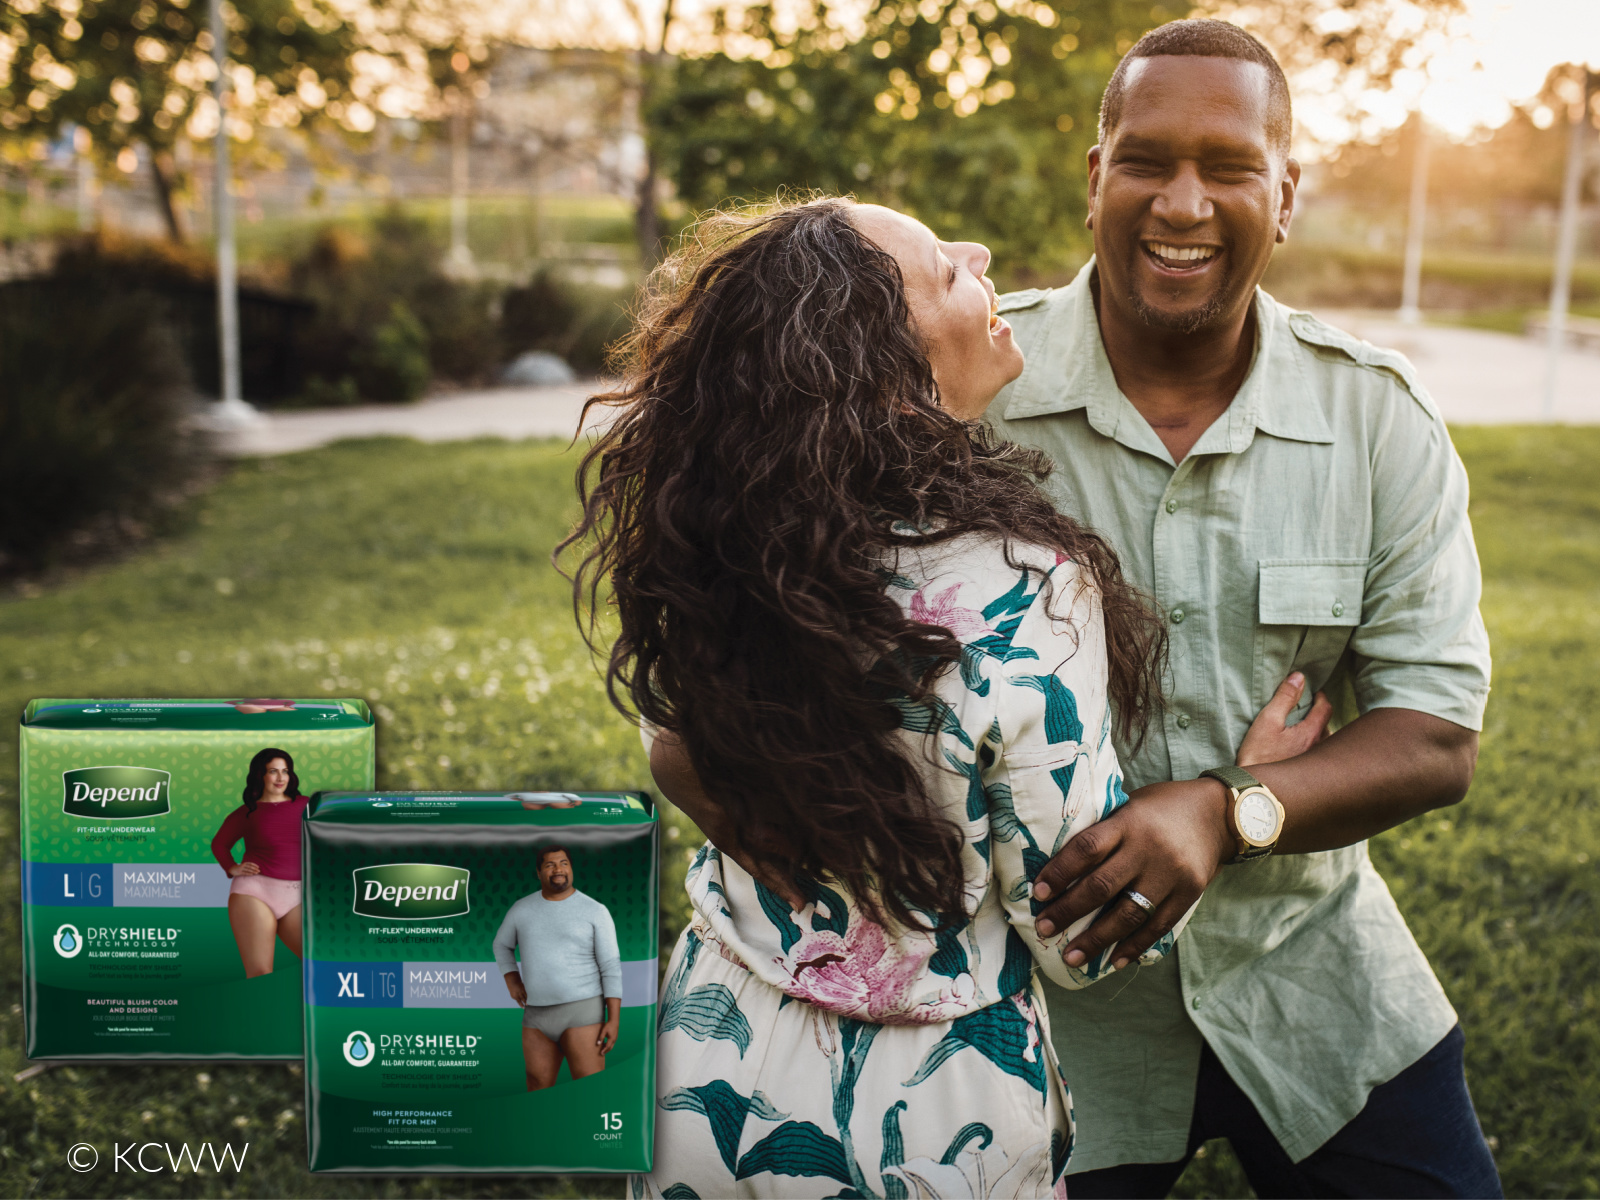 Save Up To $4 On Depend® Products At Publix And Enjoy All-Day Comfort And Confidence!